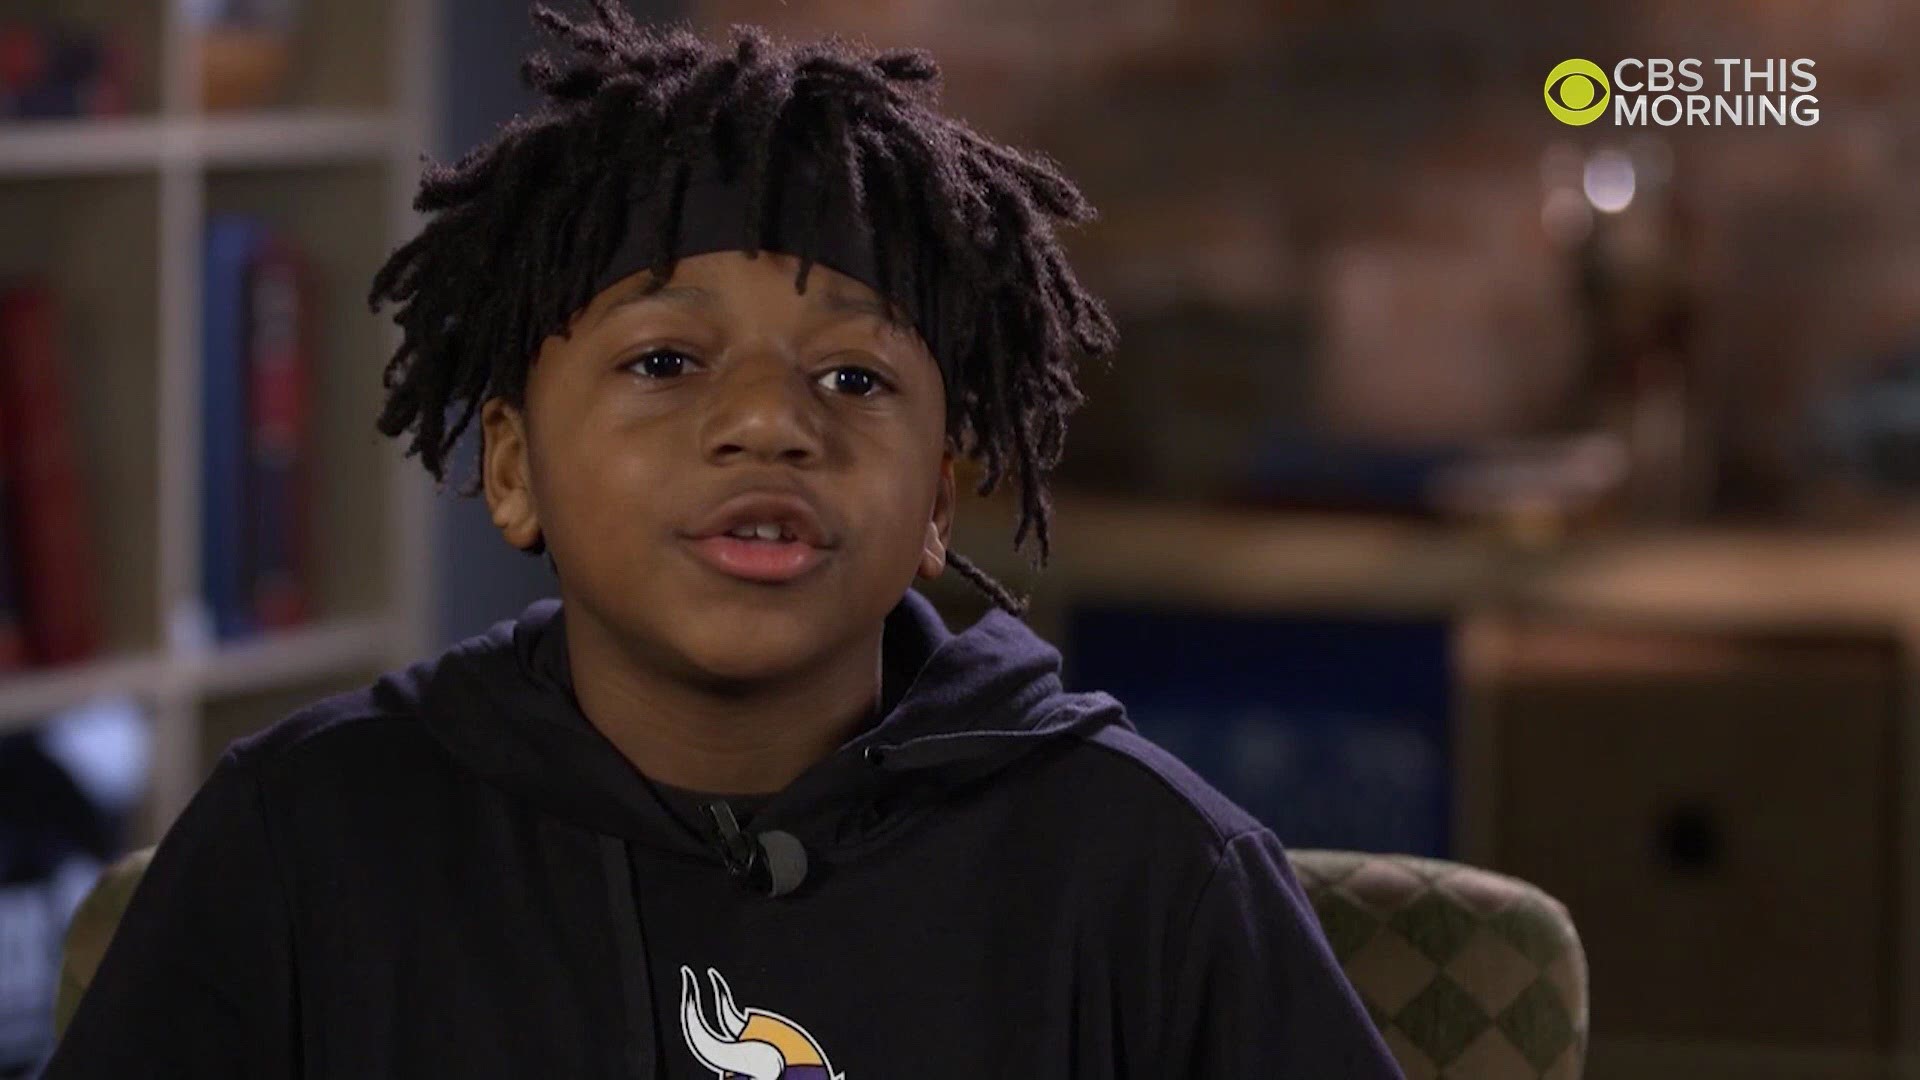 It's not just his age that makes 14-year-old rapper Ray Emmanuel an inspiration. It's his message. Tuesday on CBS This Morning, the reason the teen was tapped to perform at this year's Martin Luther King, Jr. commemorative service.